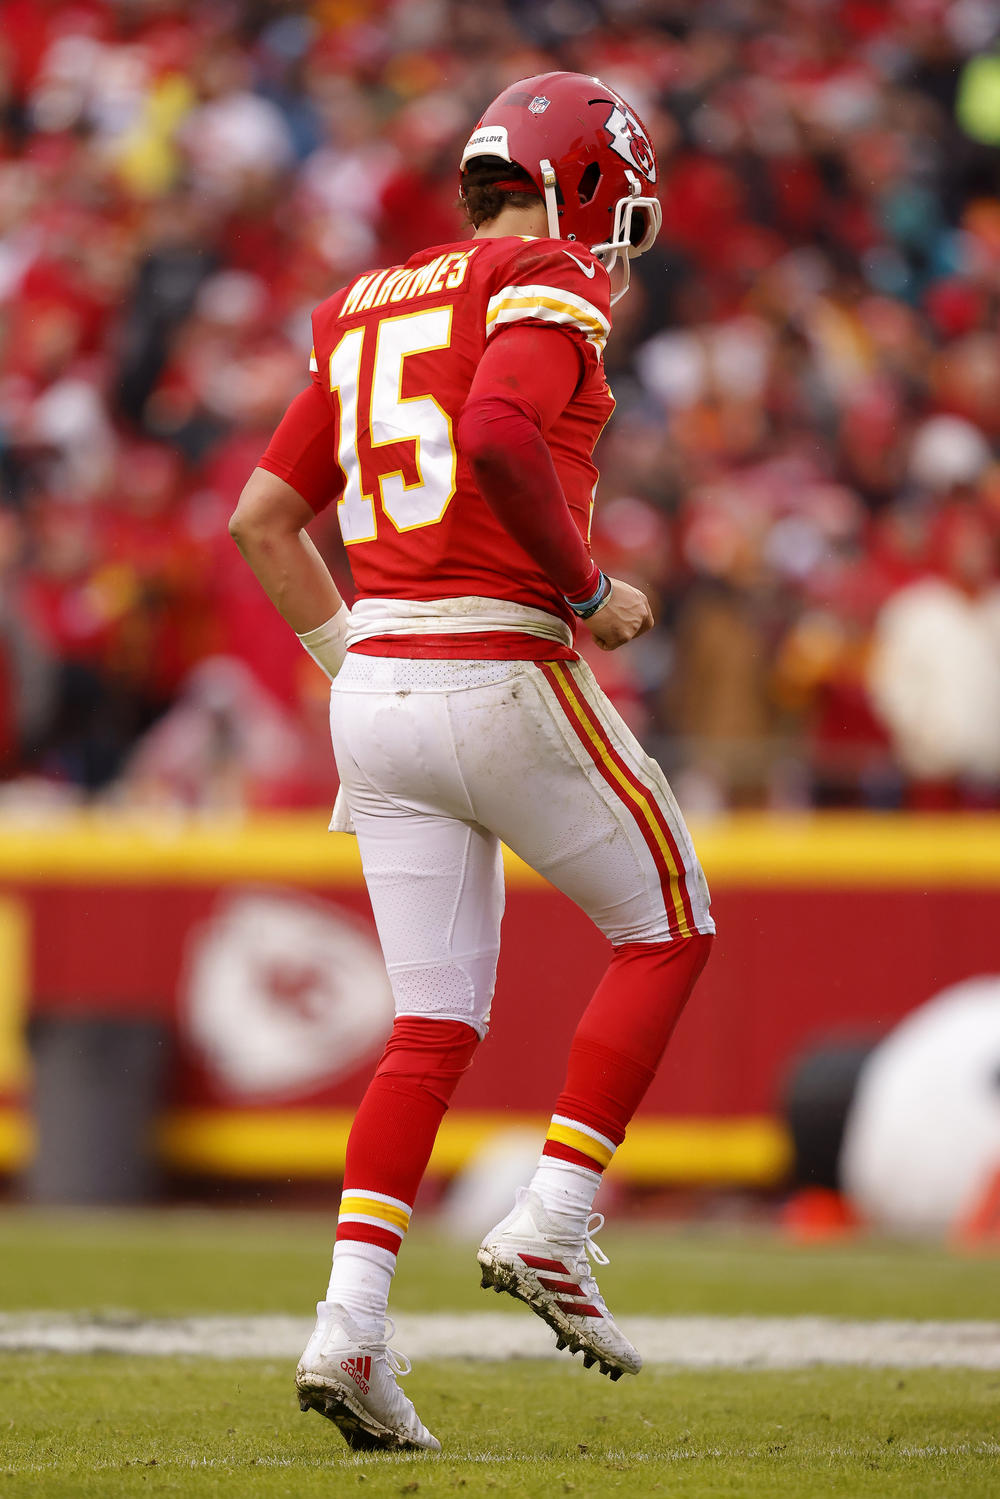 Kansas City Chiefs quarterback Patrick Mahomes limps on the field after being injured against the Jacksonville Jaguars at Arrowhead Stadium on Jan. 21.